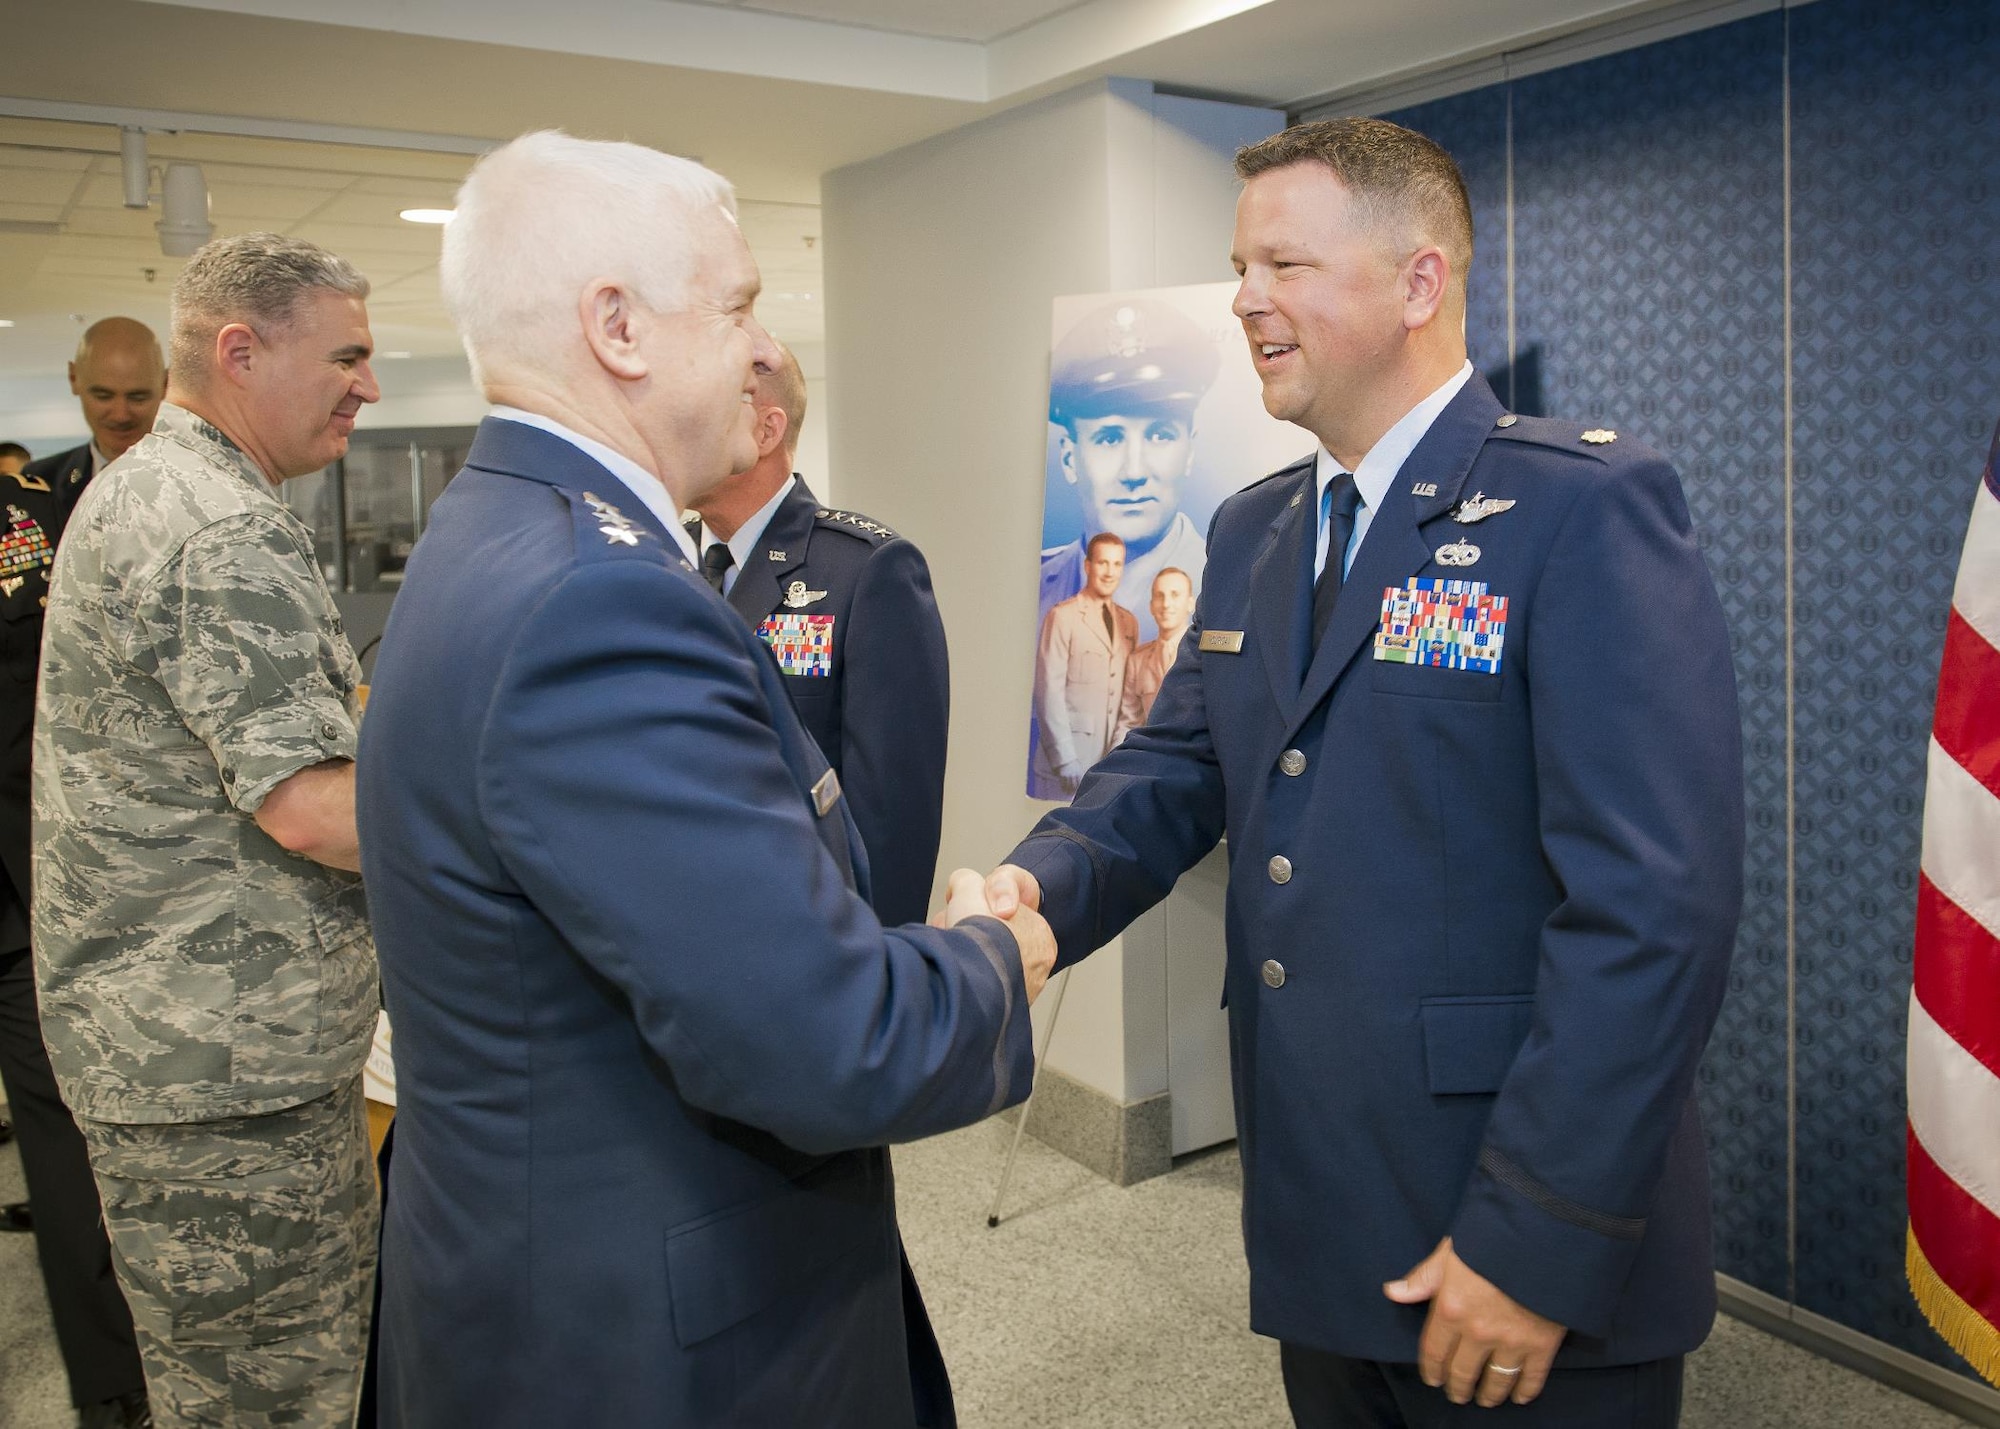 Lt. Gen. L. Scott Rice, director of the Air National Guard congratulates Maj. John Hourigan, a 123rd Operations Support Squadron C-130 Hercules pilot, after a ceremony where Hourigan received the Koren Kolligian Jr. Trophy at the Pentagon, Washington, D.C., May 17, 2017. On July 15, 2016, Hourigan’s aircraft began vibrating so badly that crew members were unable to communicate with each other through their headsets, read gauges or flight instruments. Hourigan quickly determined the source of vibration, implemented corrective action and executed an engine-out landing, saving the lives of all six crew members on board. (U.S. Air National Guard photo by Master. Sgt. Marvin R. Preston)